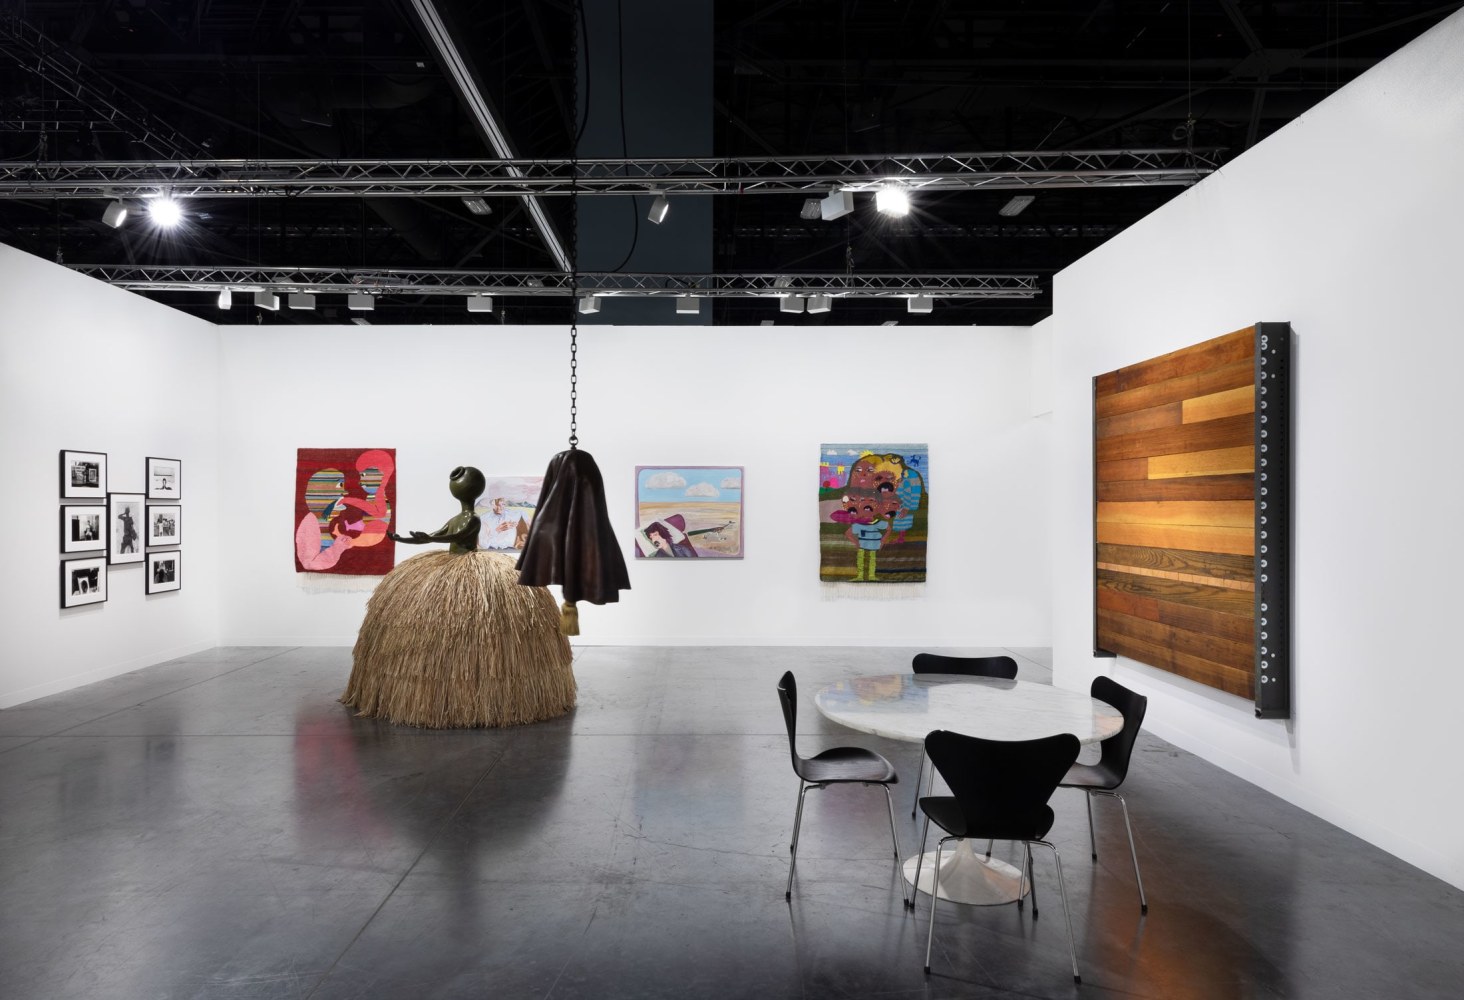 Luhring Augustine

Art Basel Miami Beach, Booth E13

Installation view

2019